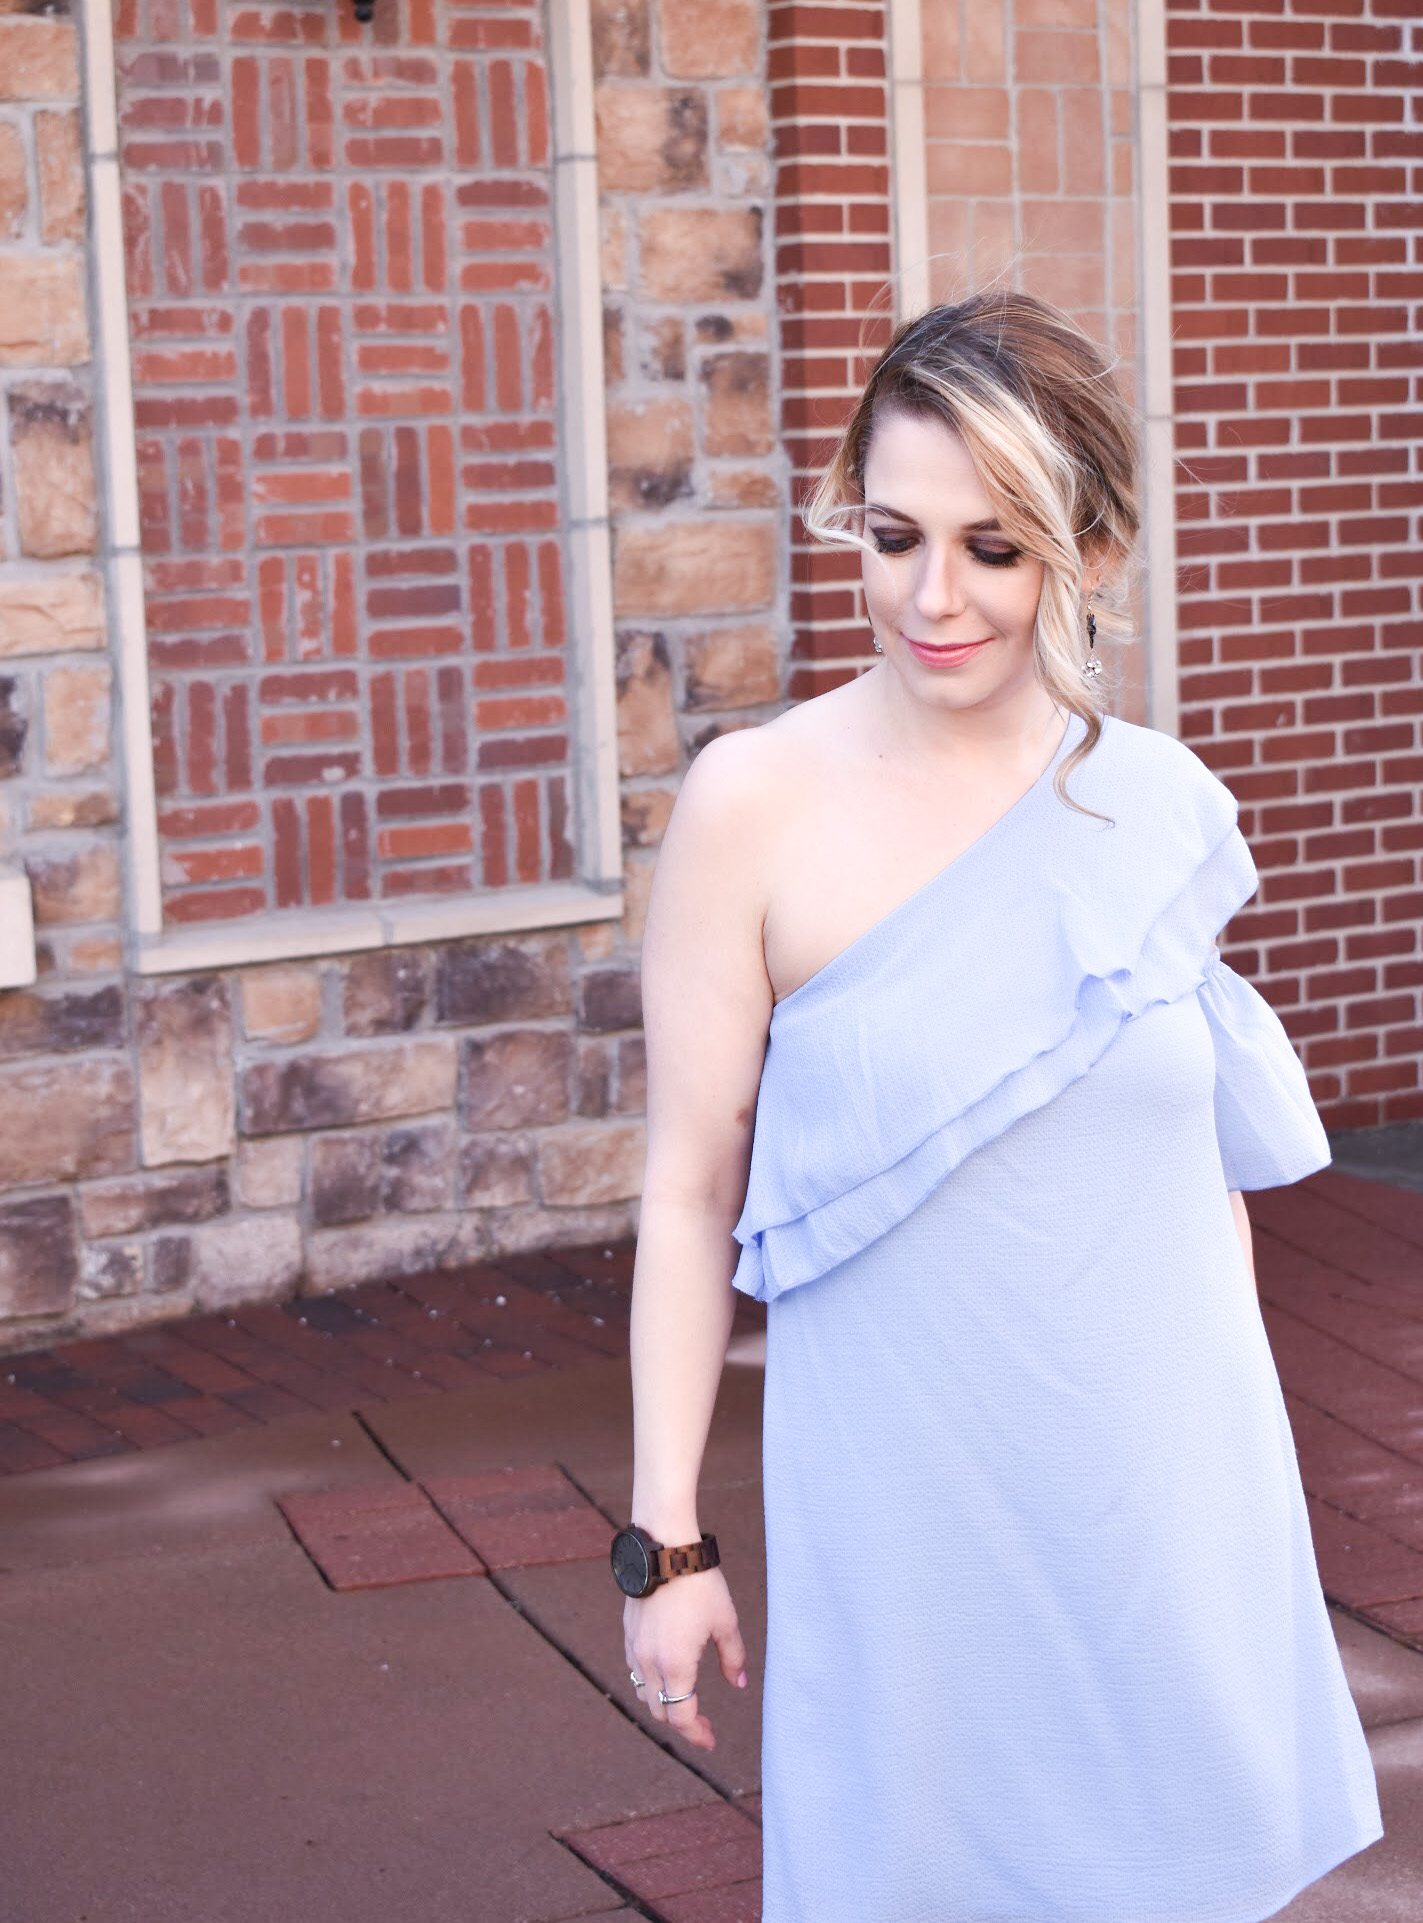 Top 5 Spring Fashion Trends 2018 - Wondering what the top spring trends will be in 2018? Fashion blogger COVET by tricia shares her top 5 spring must-haves to get you ready for warmer weather! From clothes to accessories, here's what your closet needs to be ready for spring 2018.